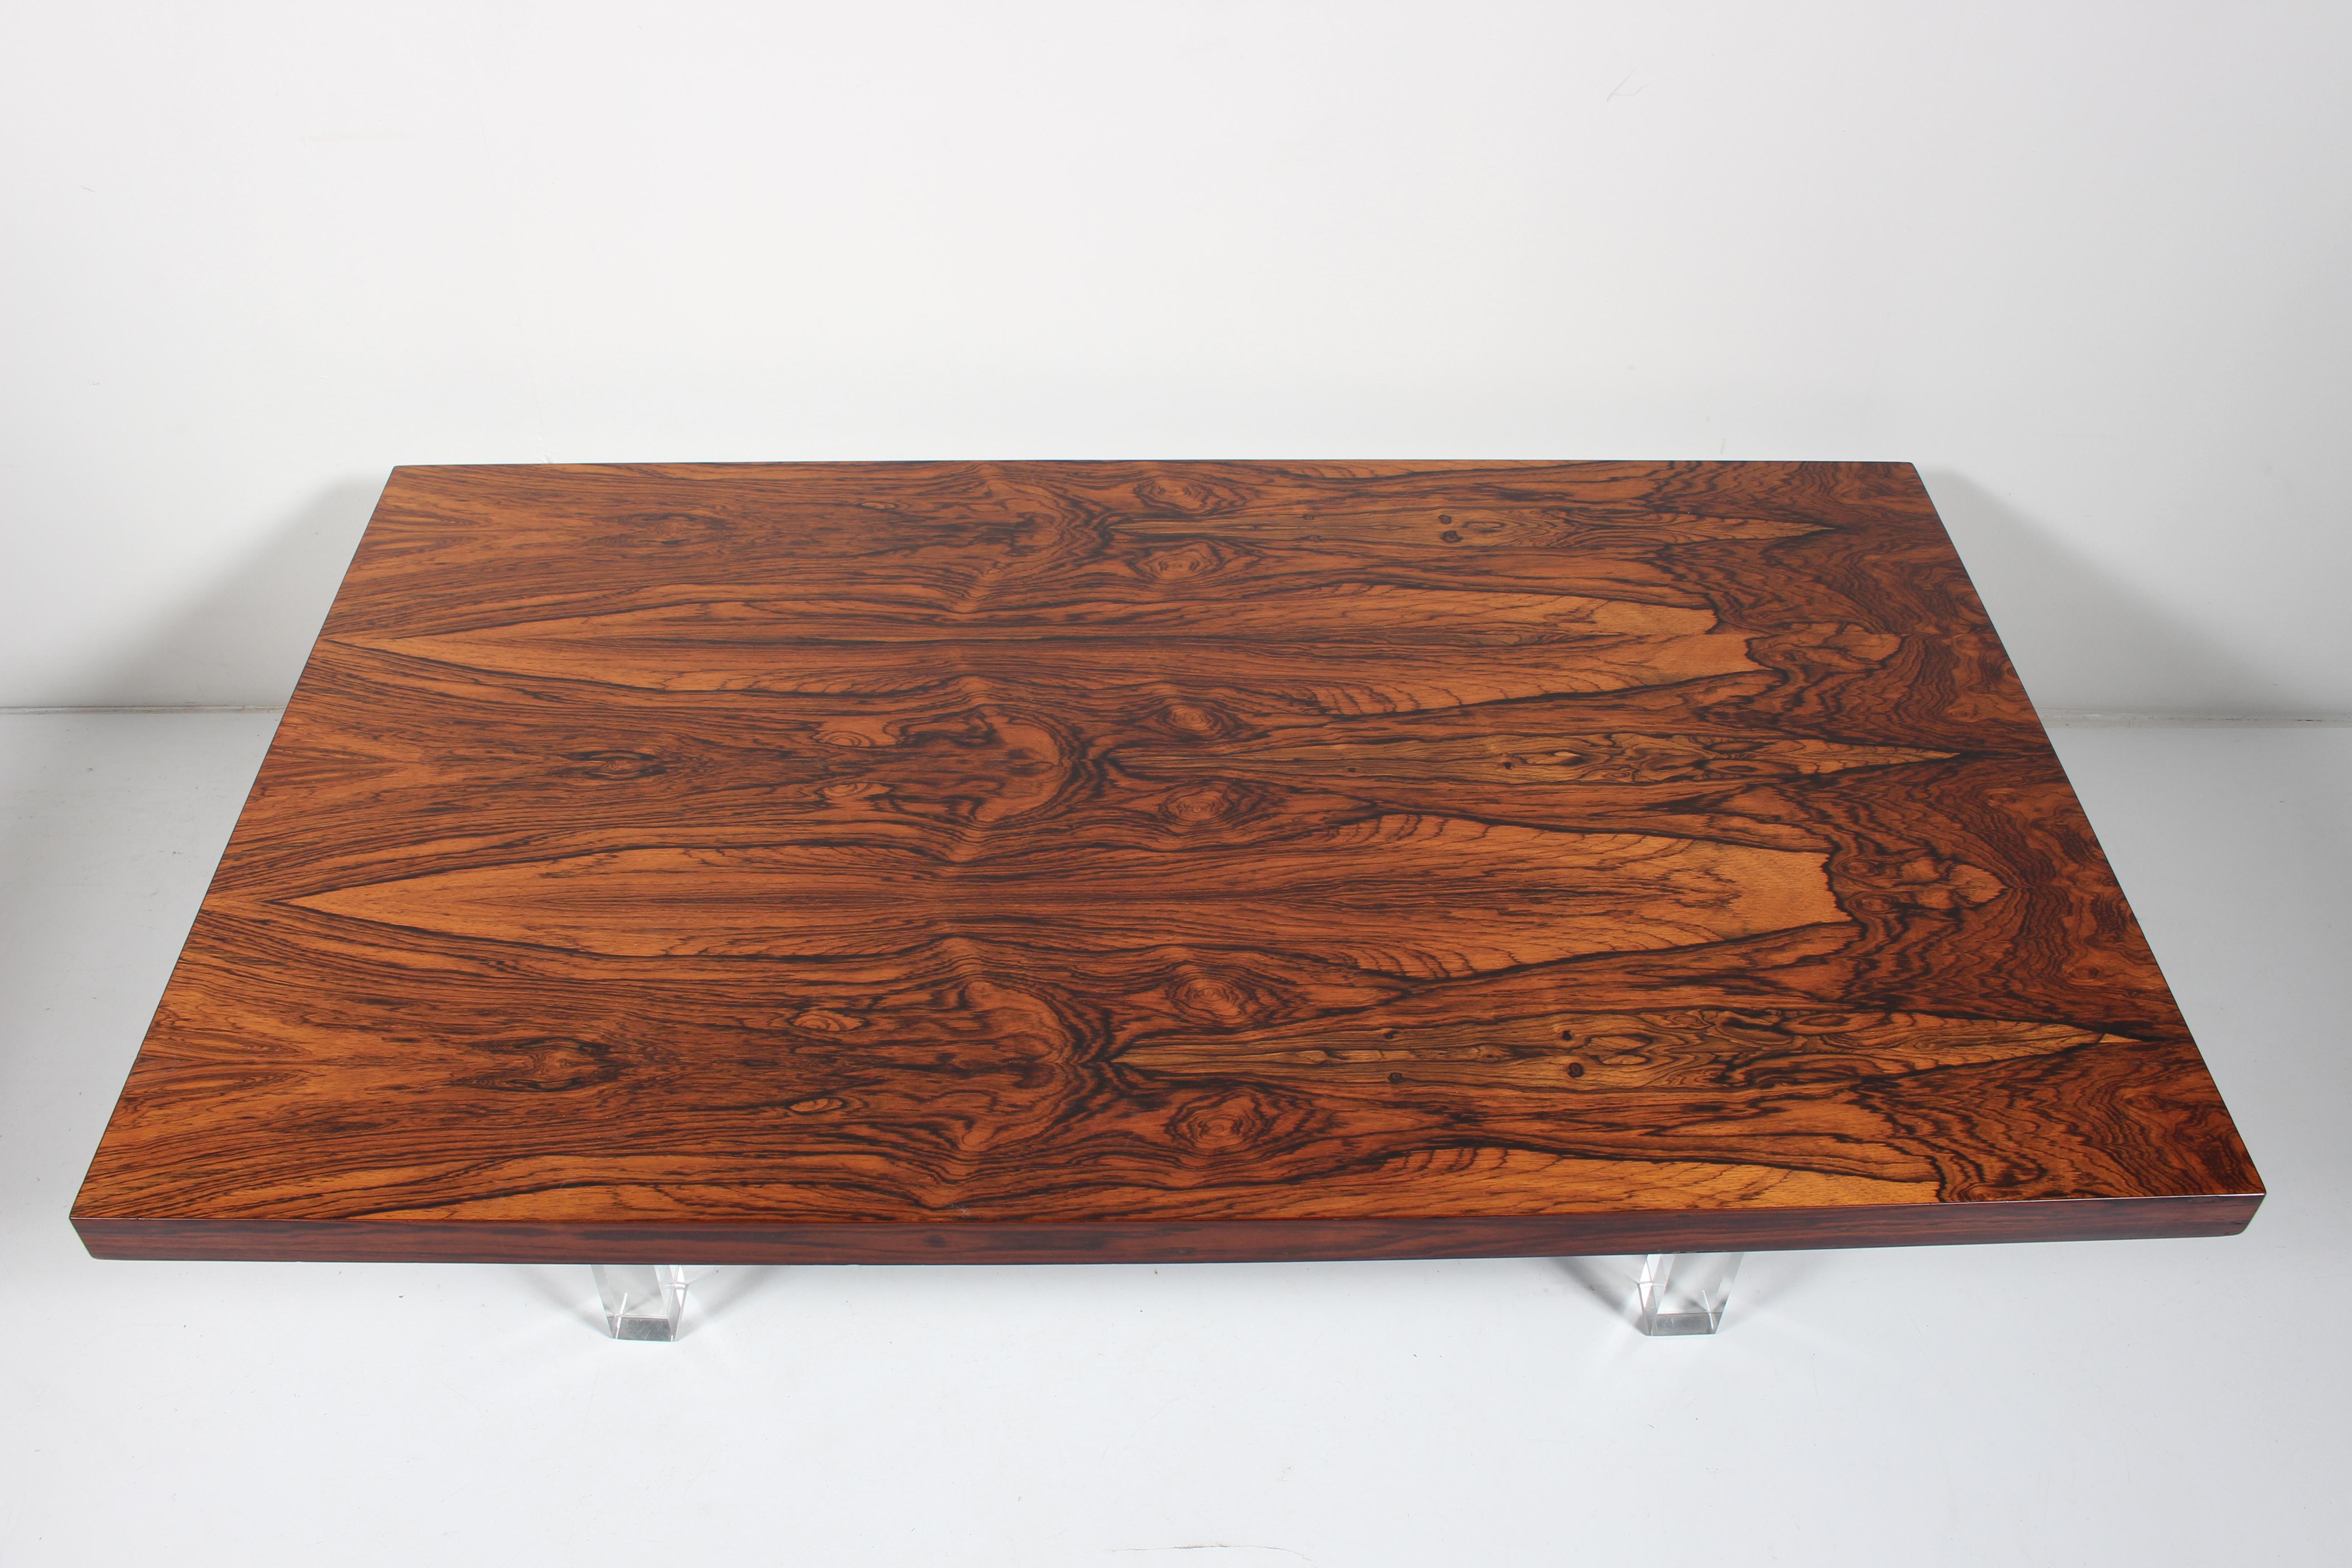 Milo Baughman for Thayer Coggin Brazilian Rosewood Coffee Table, 1960s 
Featuring a finely crafted rectangular book-matched grain Rosewood, raised on four square, balanced and solid transparent lucite legs. Perfect for a Modern environment. WIth